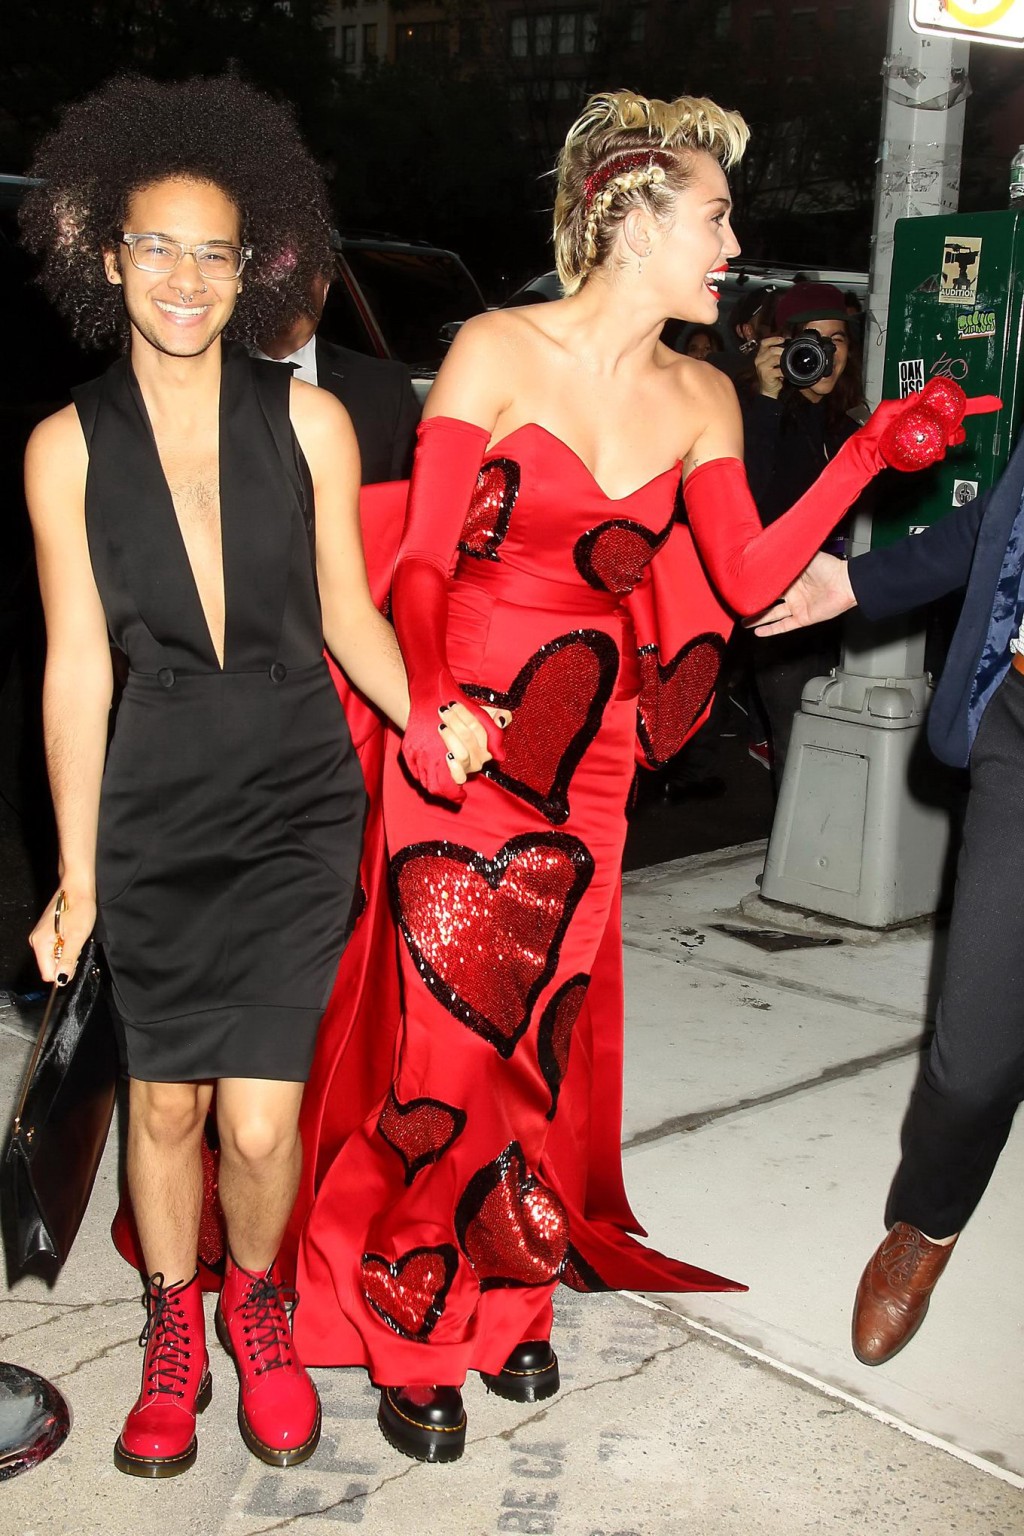 Miley Cyrus busty in a strapless red dress kissing a tranvestite #75160828